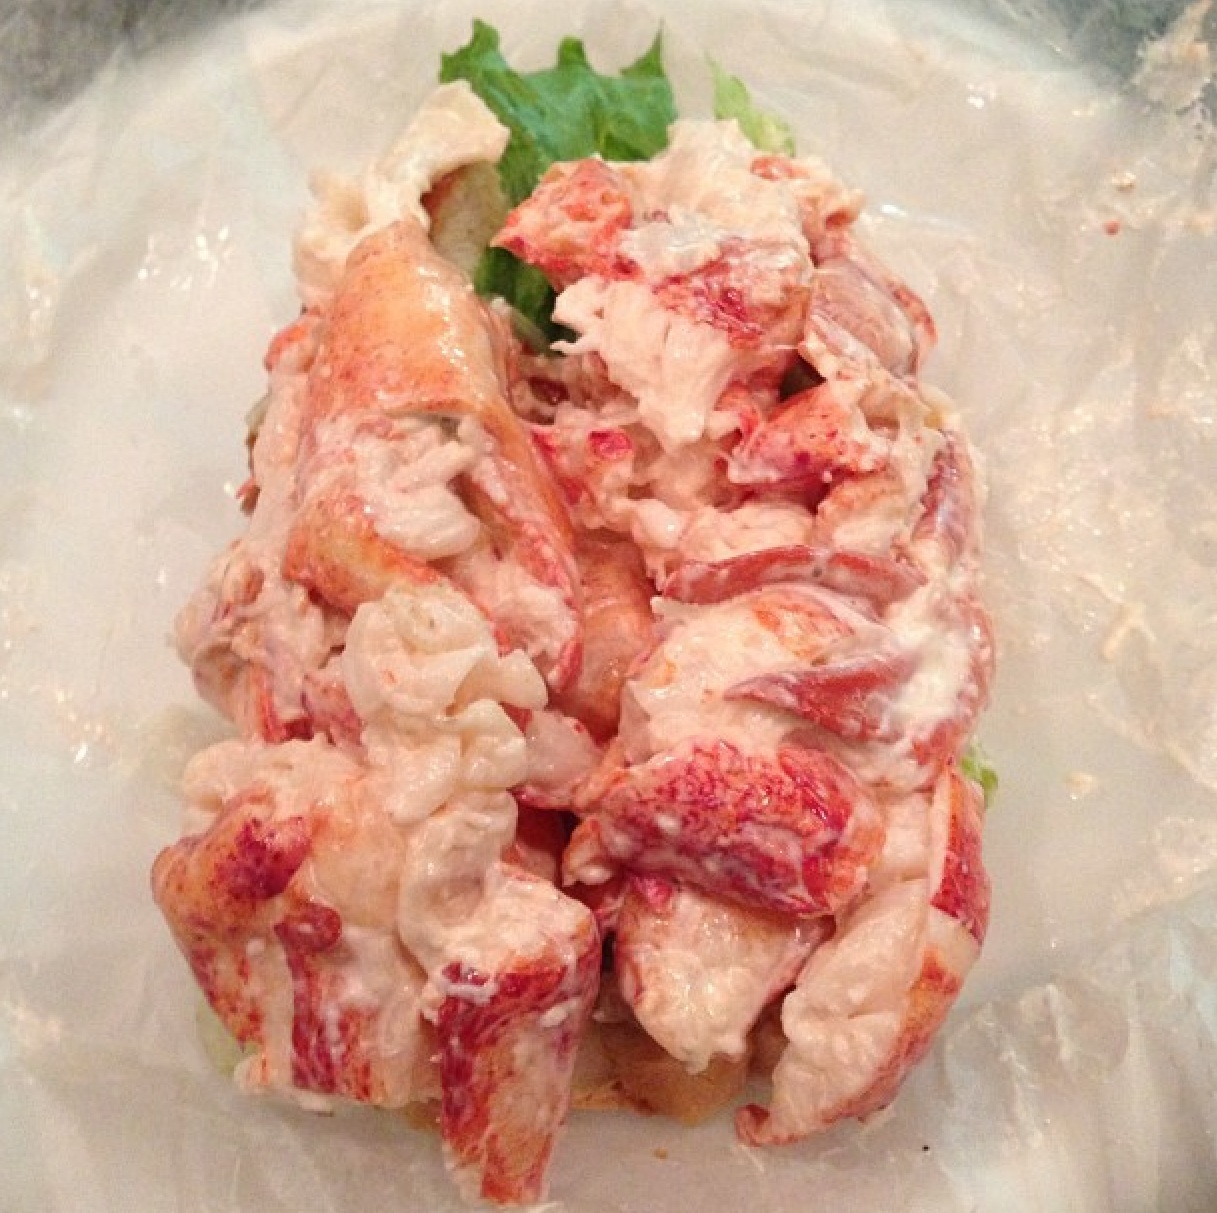 @Slova_Don says Belle Isle in Winthrop, MA has the best lobster rolls. If your ever in town be sure to visit!